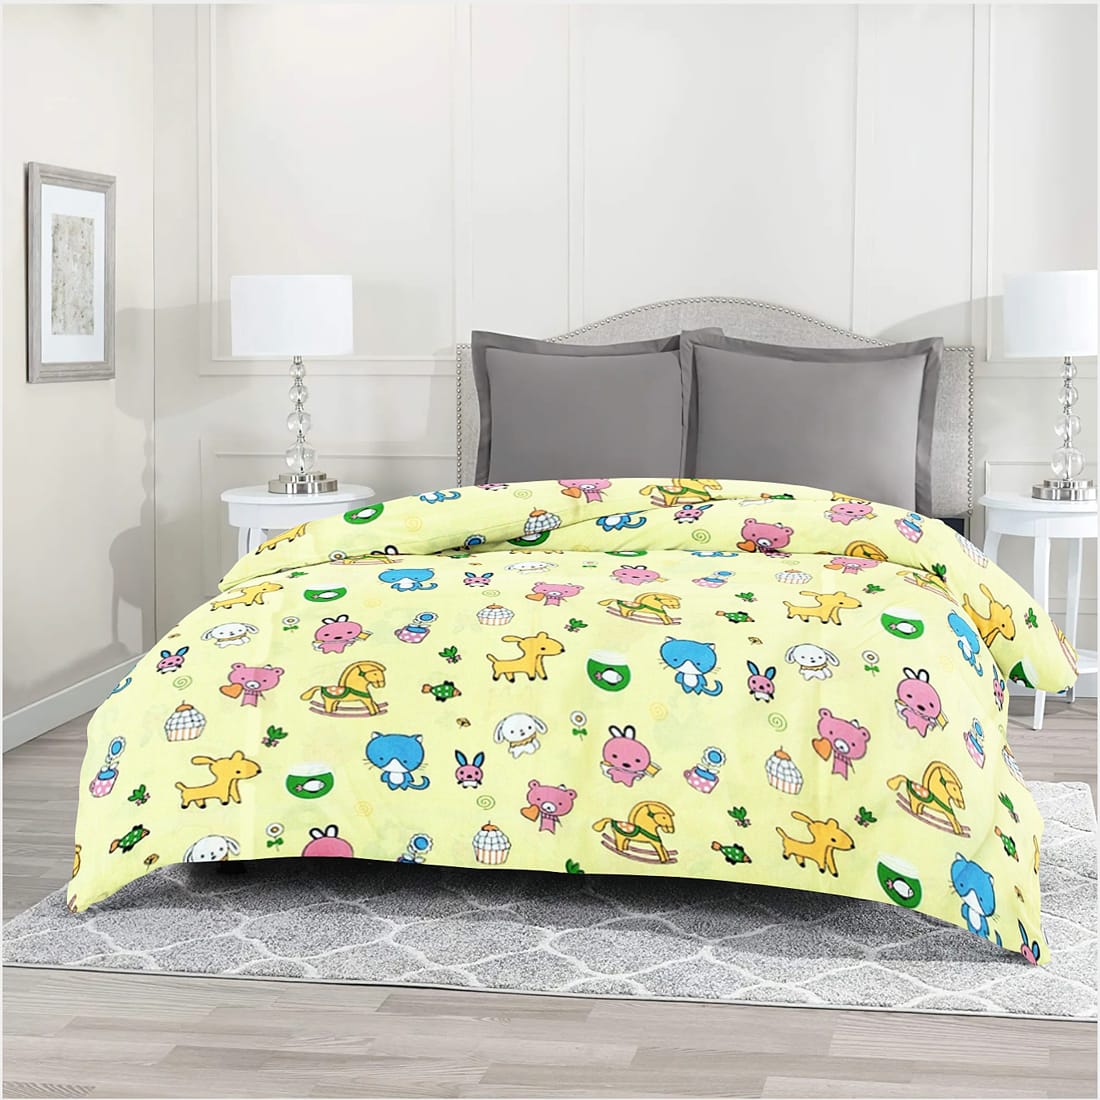 Kids Funky Teddy Print Single Bed Cotton Duvet Cover with Zipper in Yellow online (1pc)